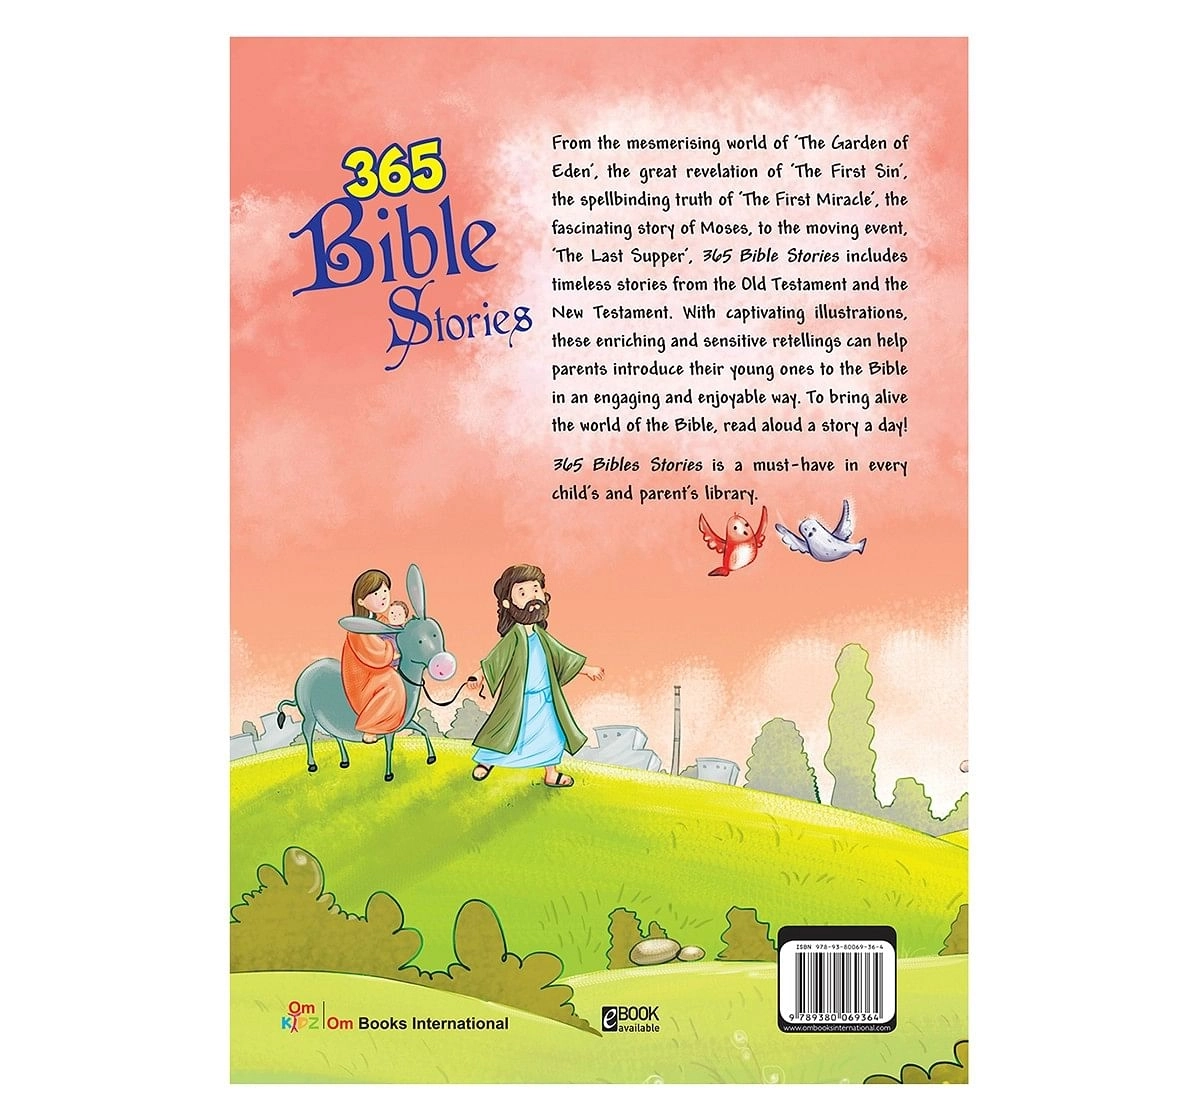 Om Books: 365 Bible Stories, 236 Pages, Hardcover